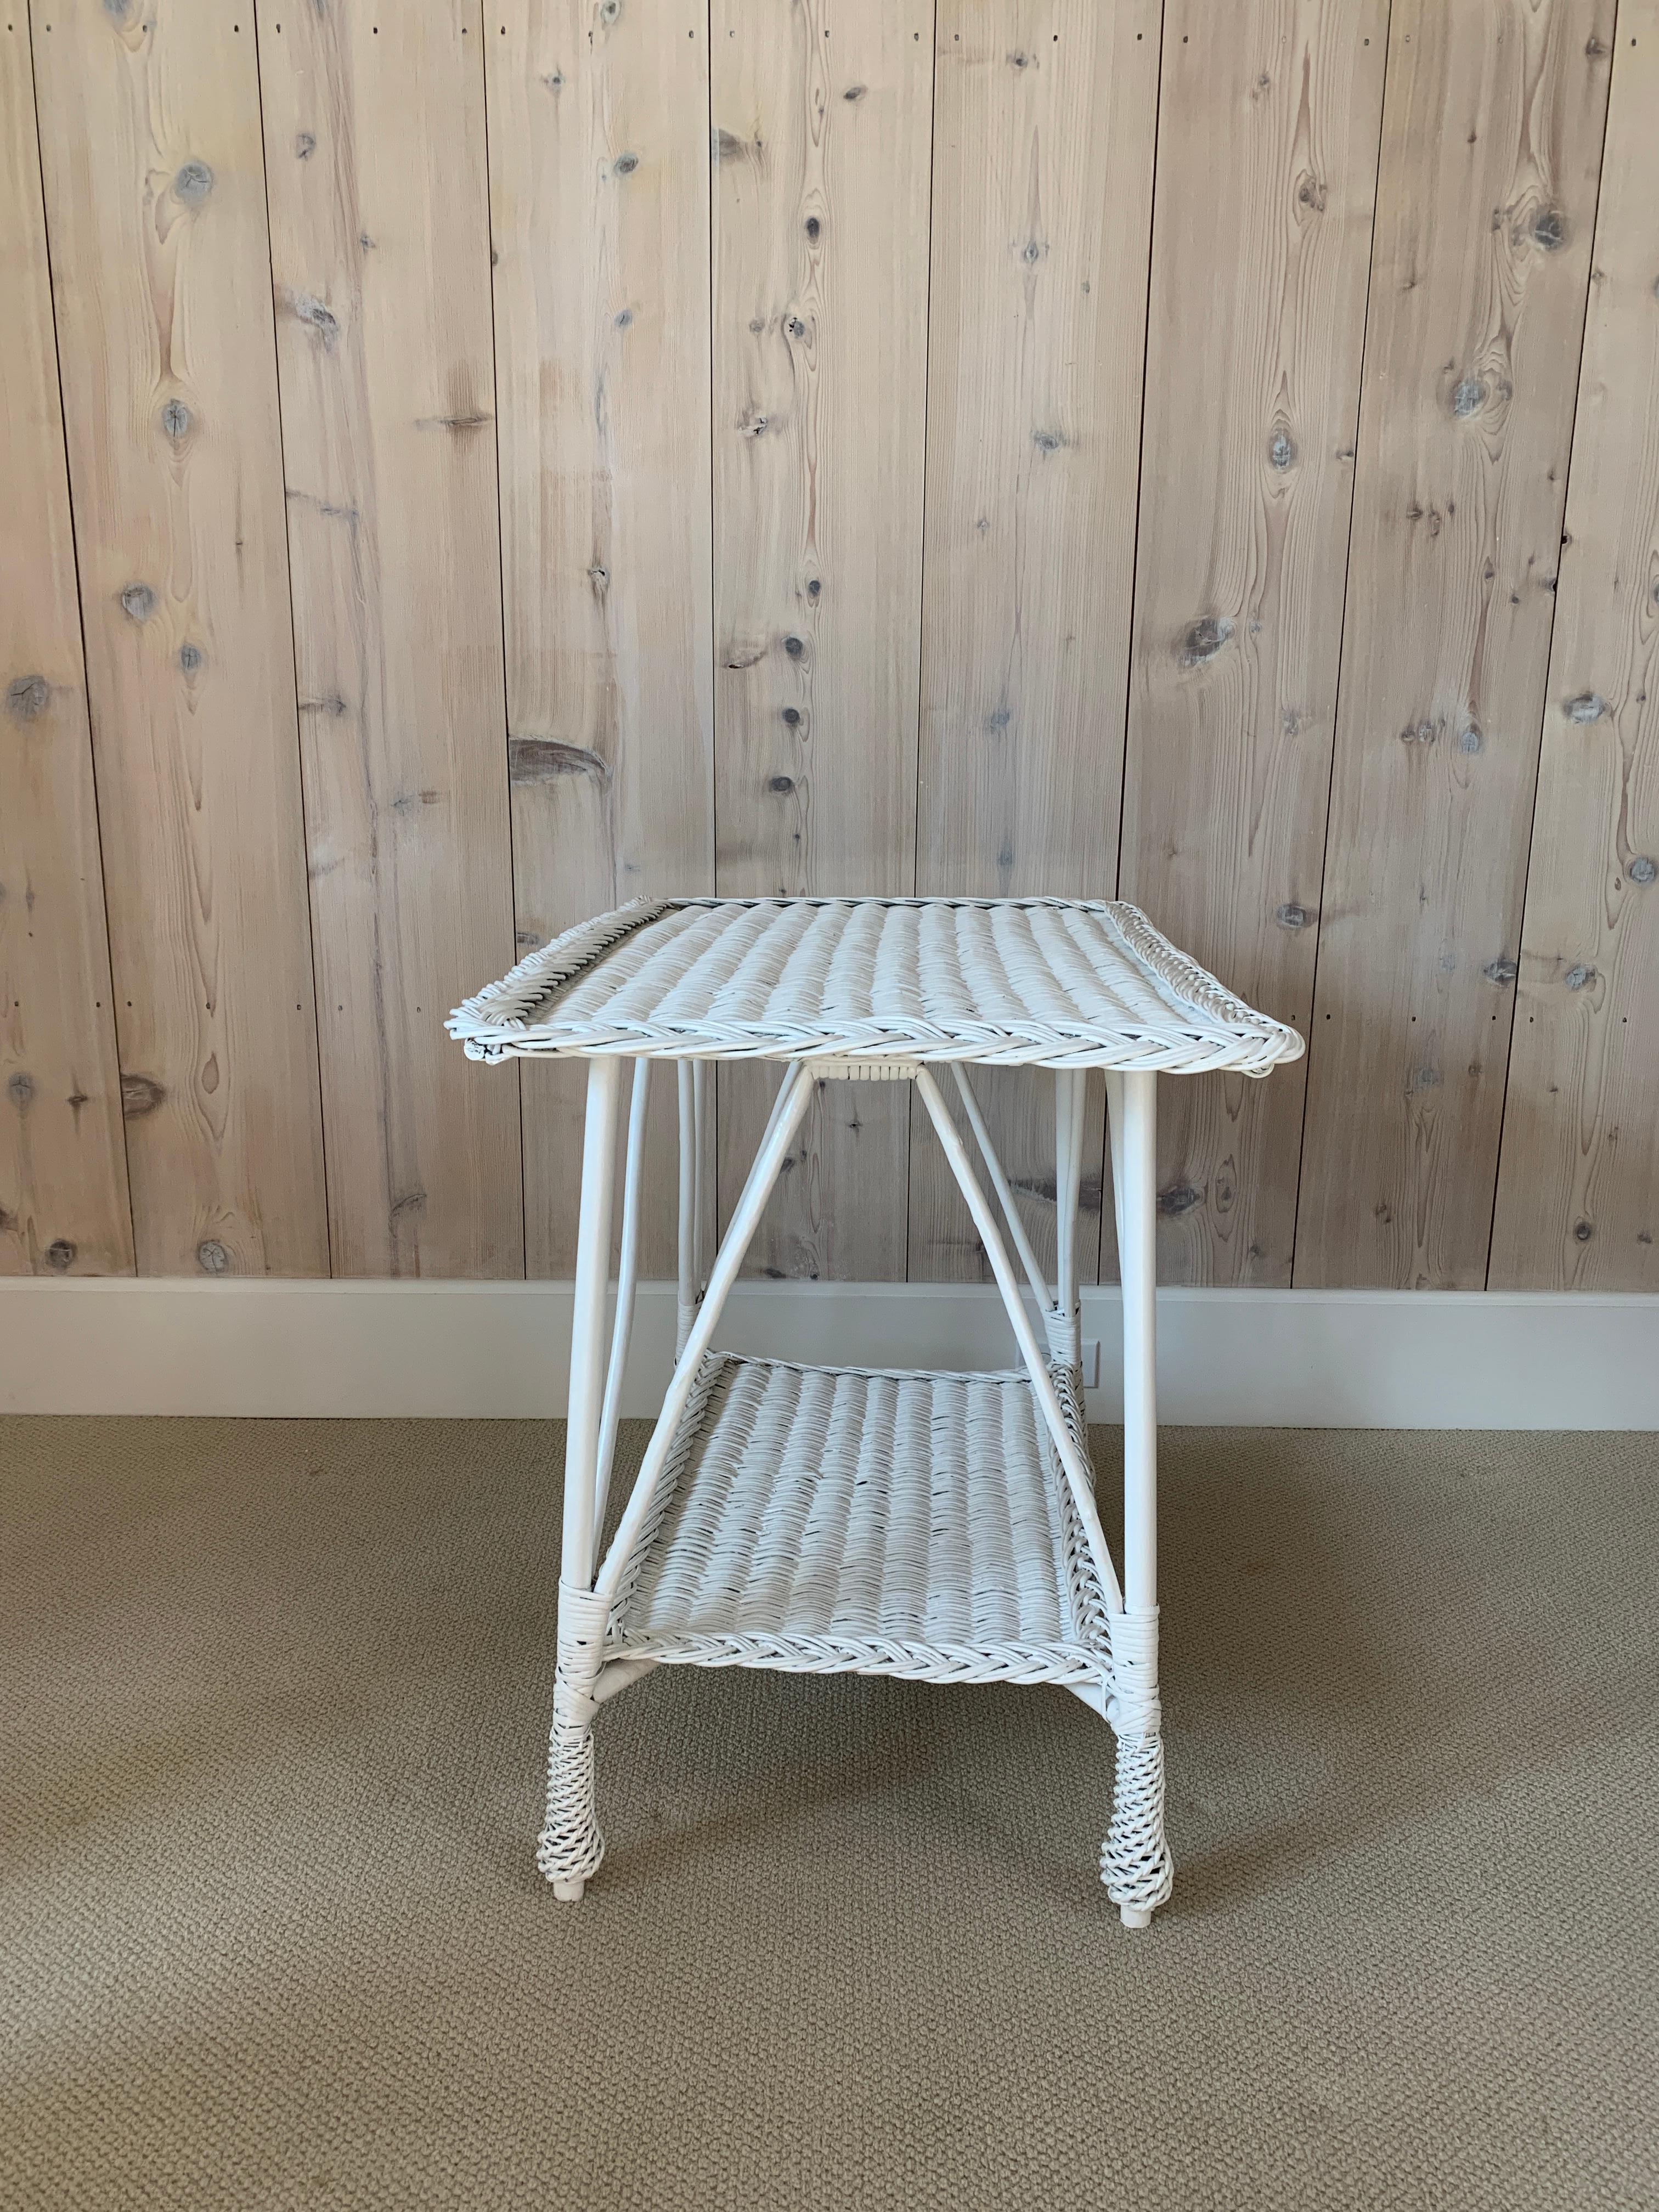 Antique Wicker Table In Good Condition For Sale In Old Saybrook, CT